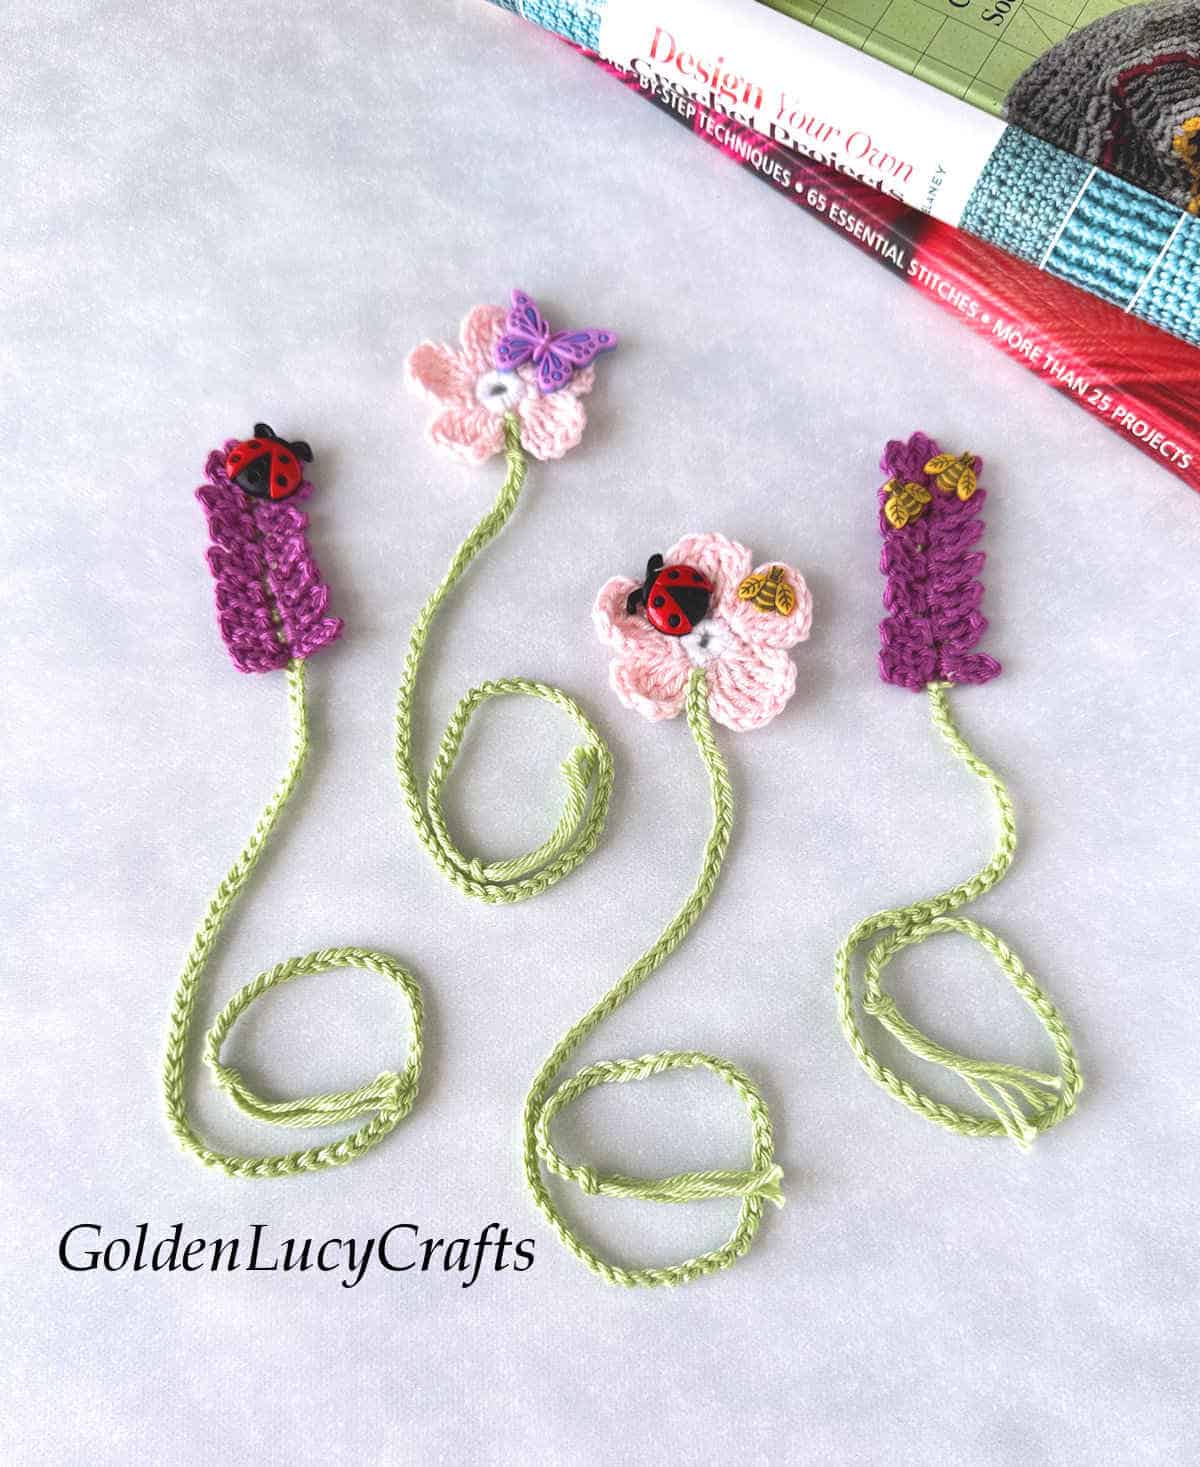 Four crochet flower bookmarks and books in the background.